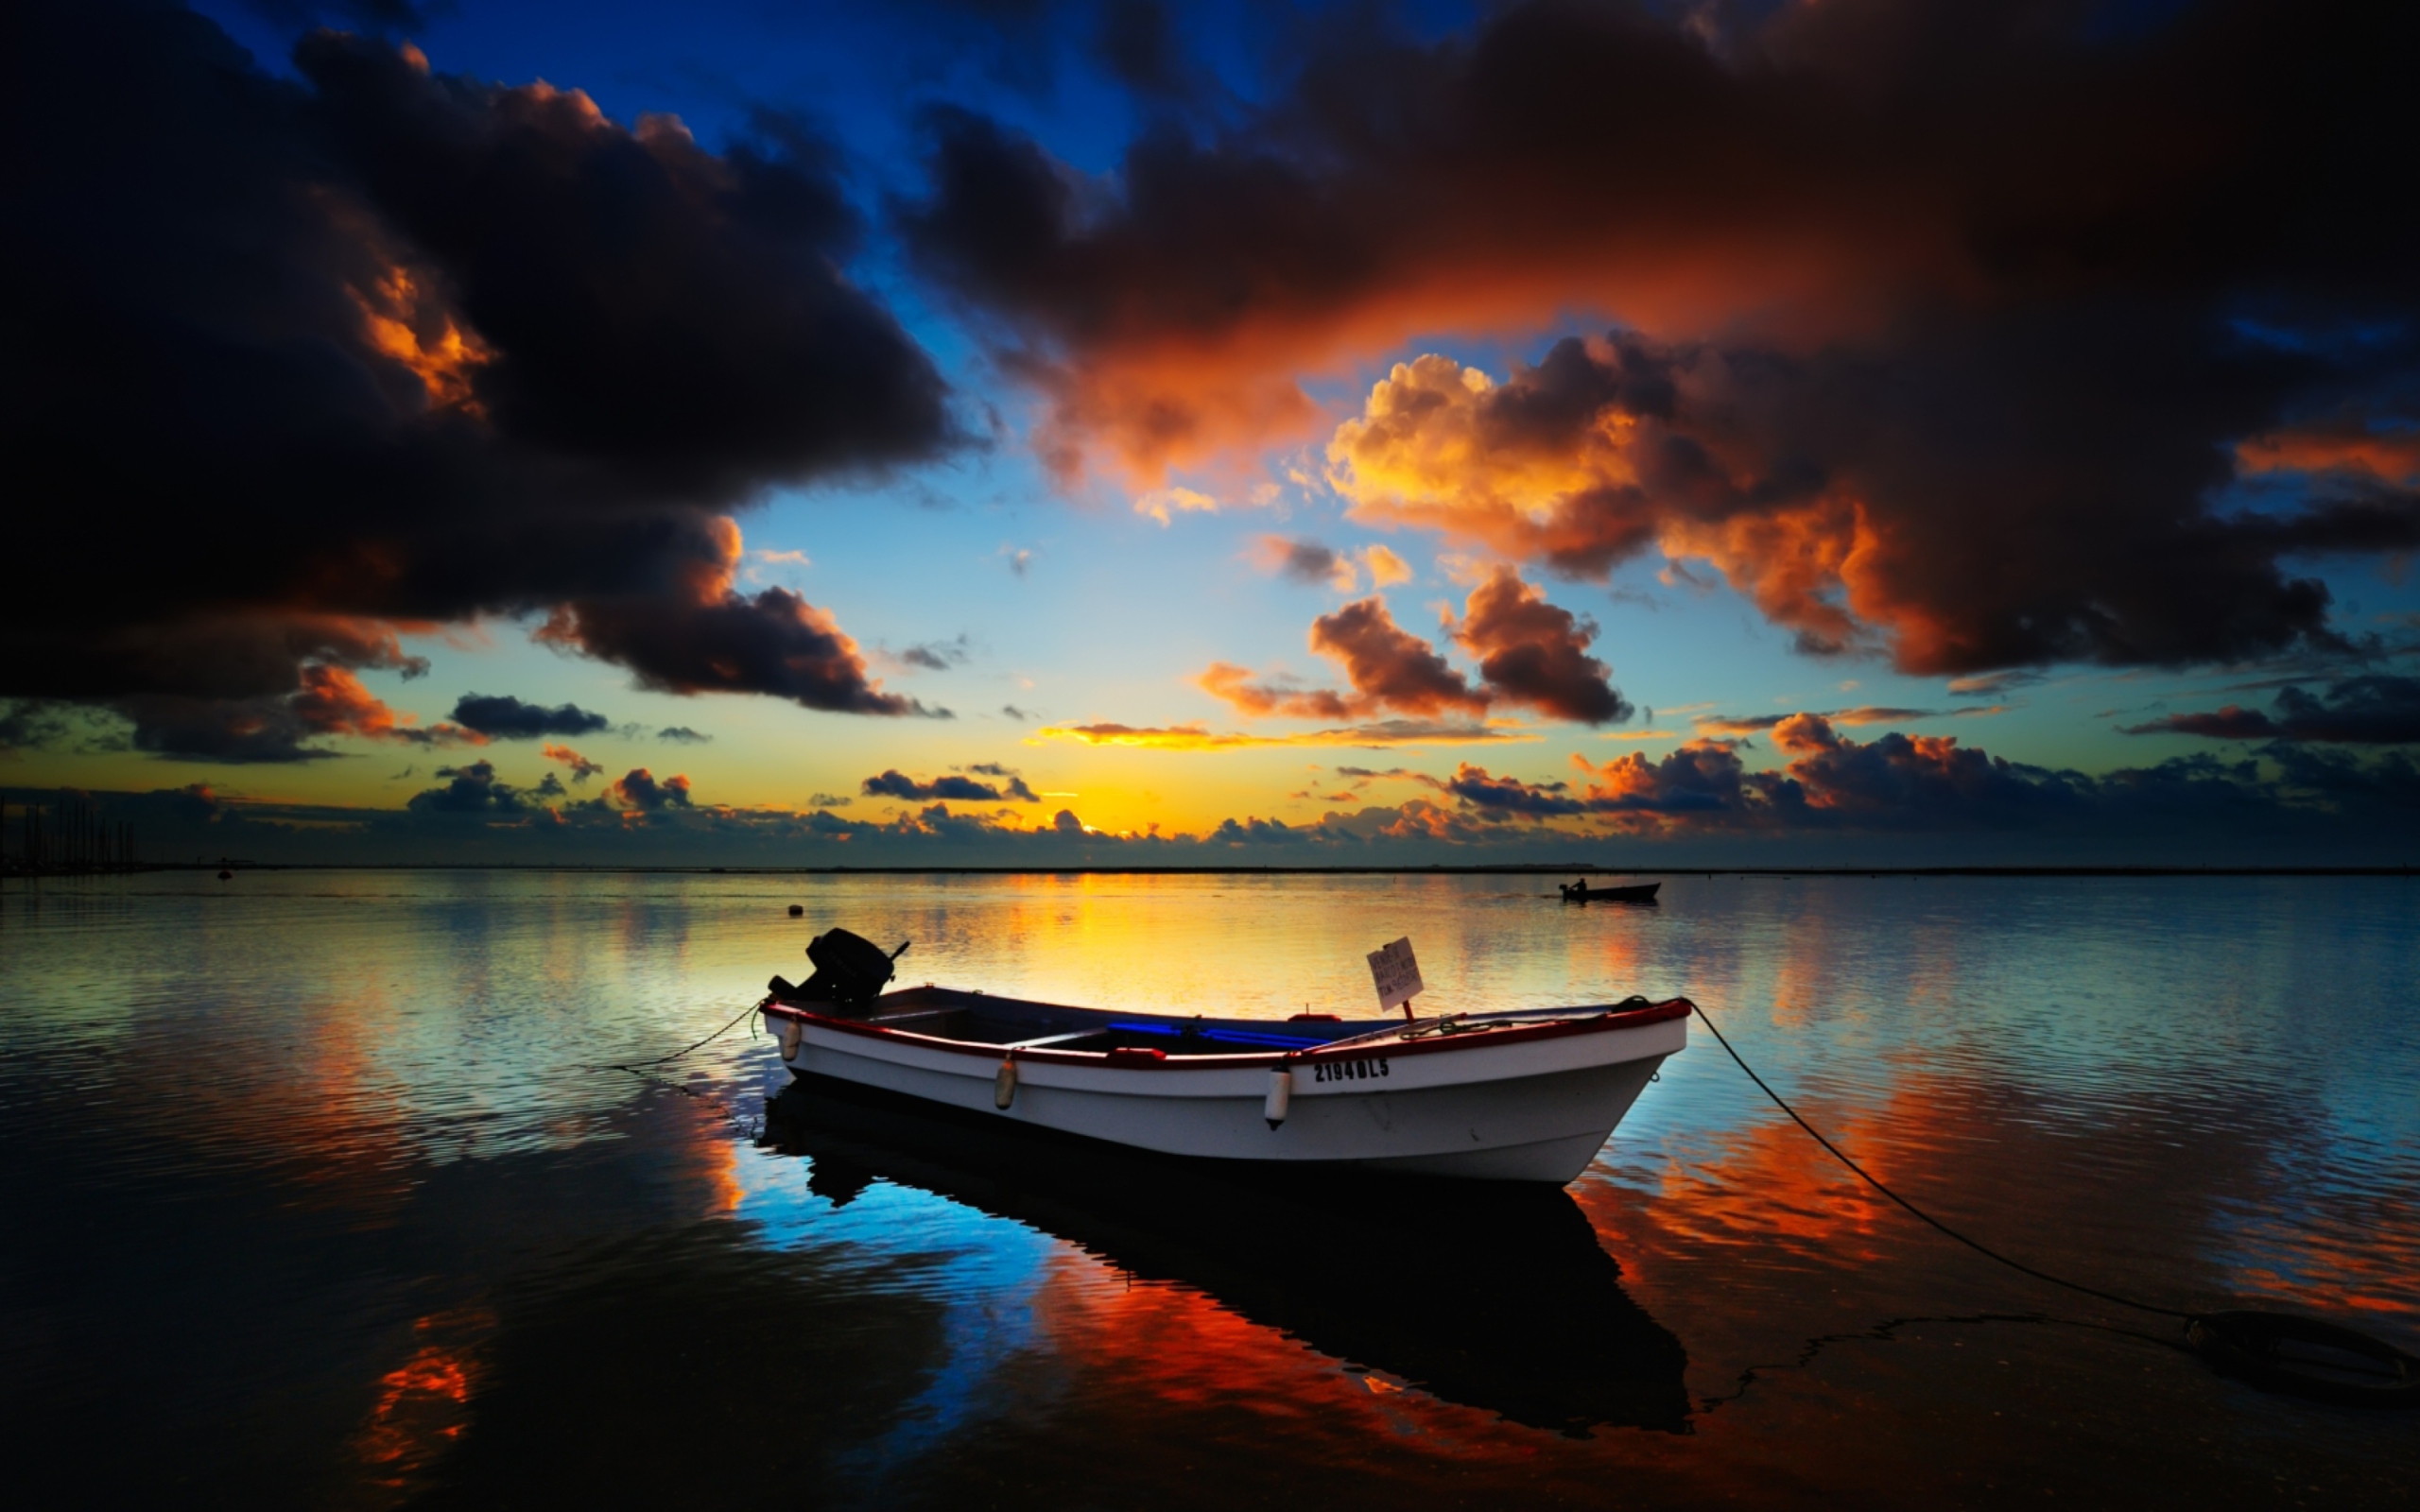 Boat In Sea At Sunset wallpaper 2560x1600